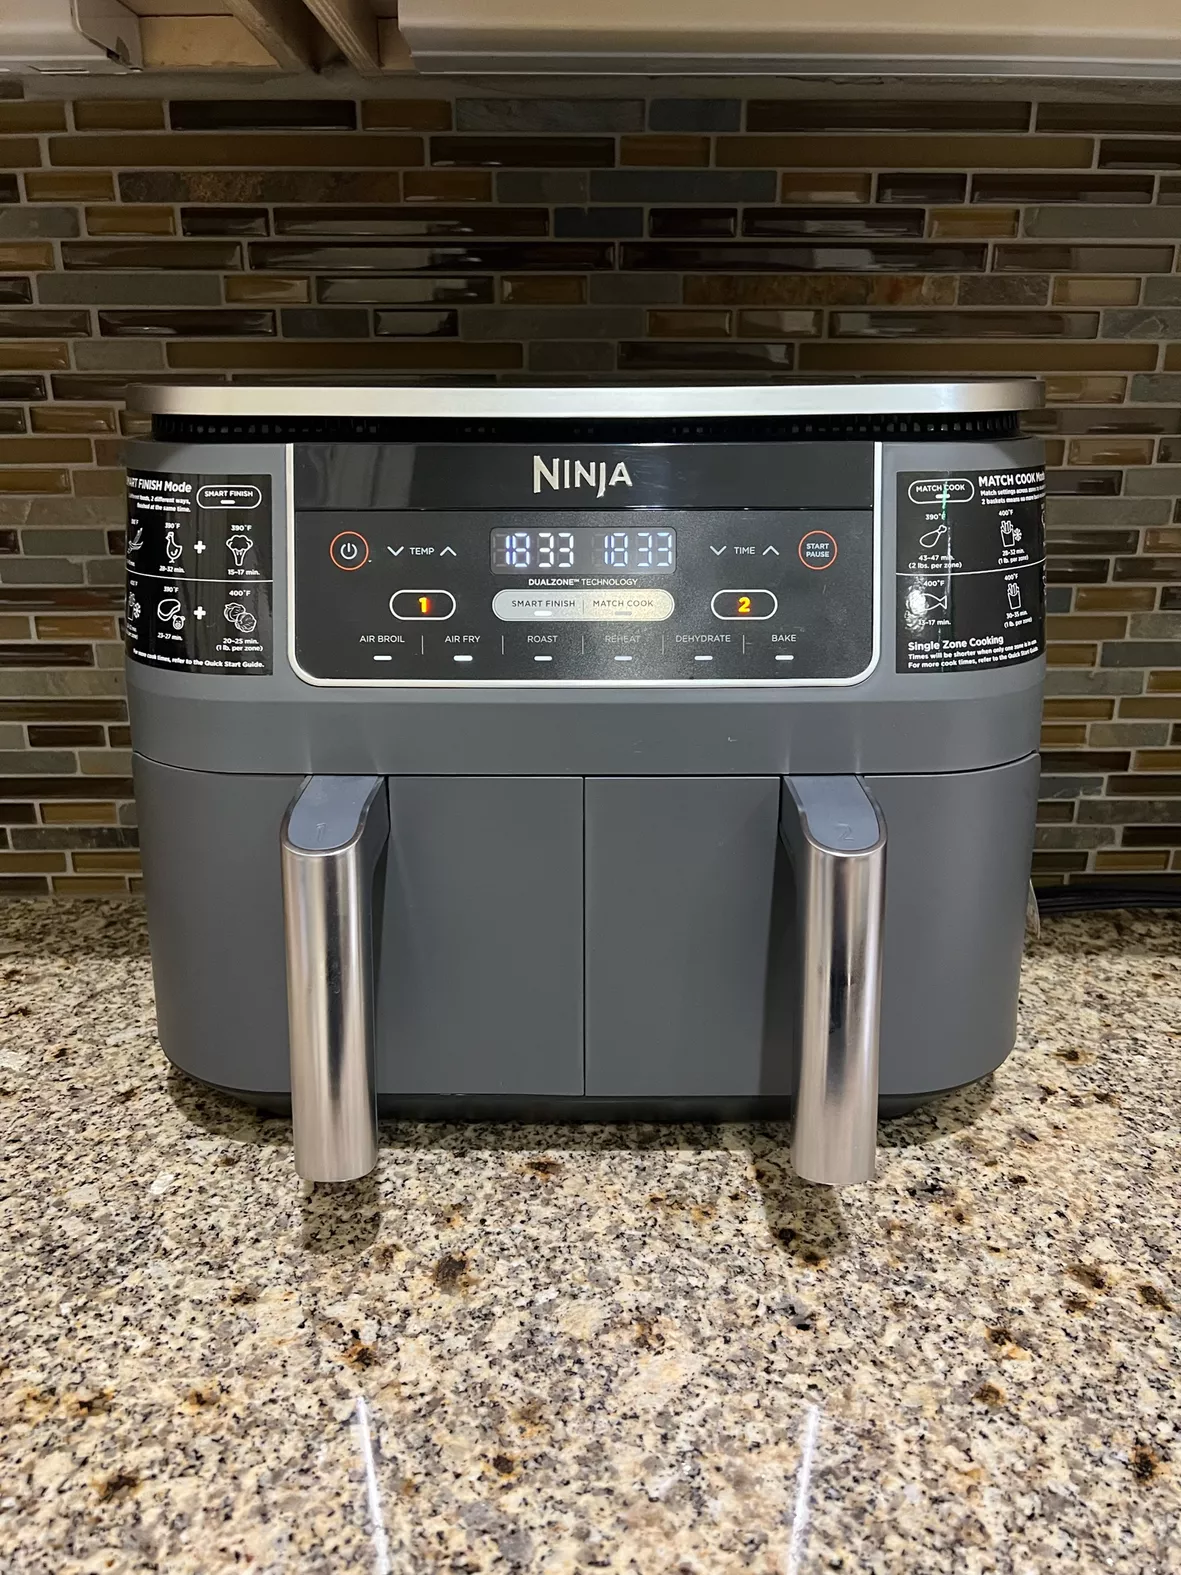 Ninja FT102A Foodi 9-in-1 Digital Air Fry Oven with Convection Oven,  Toaster, Air Fryer 